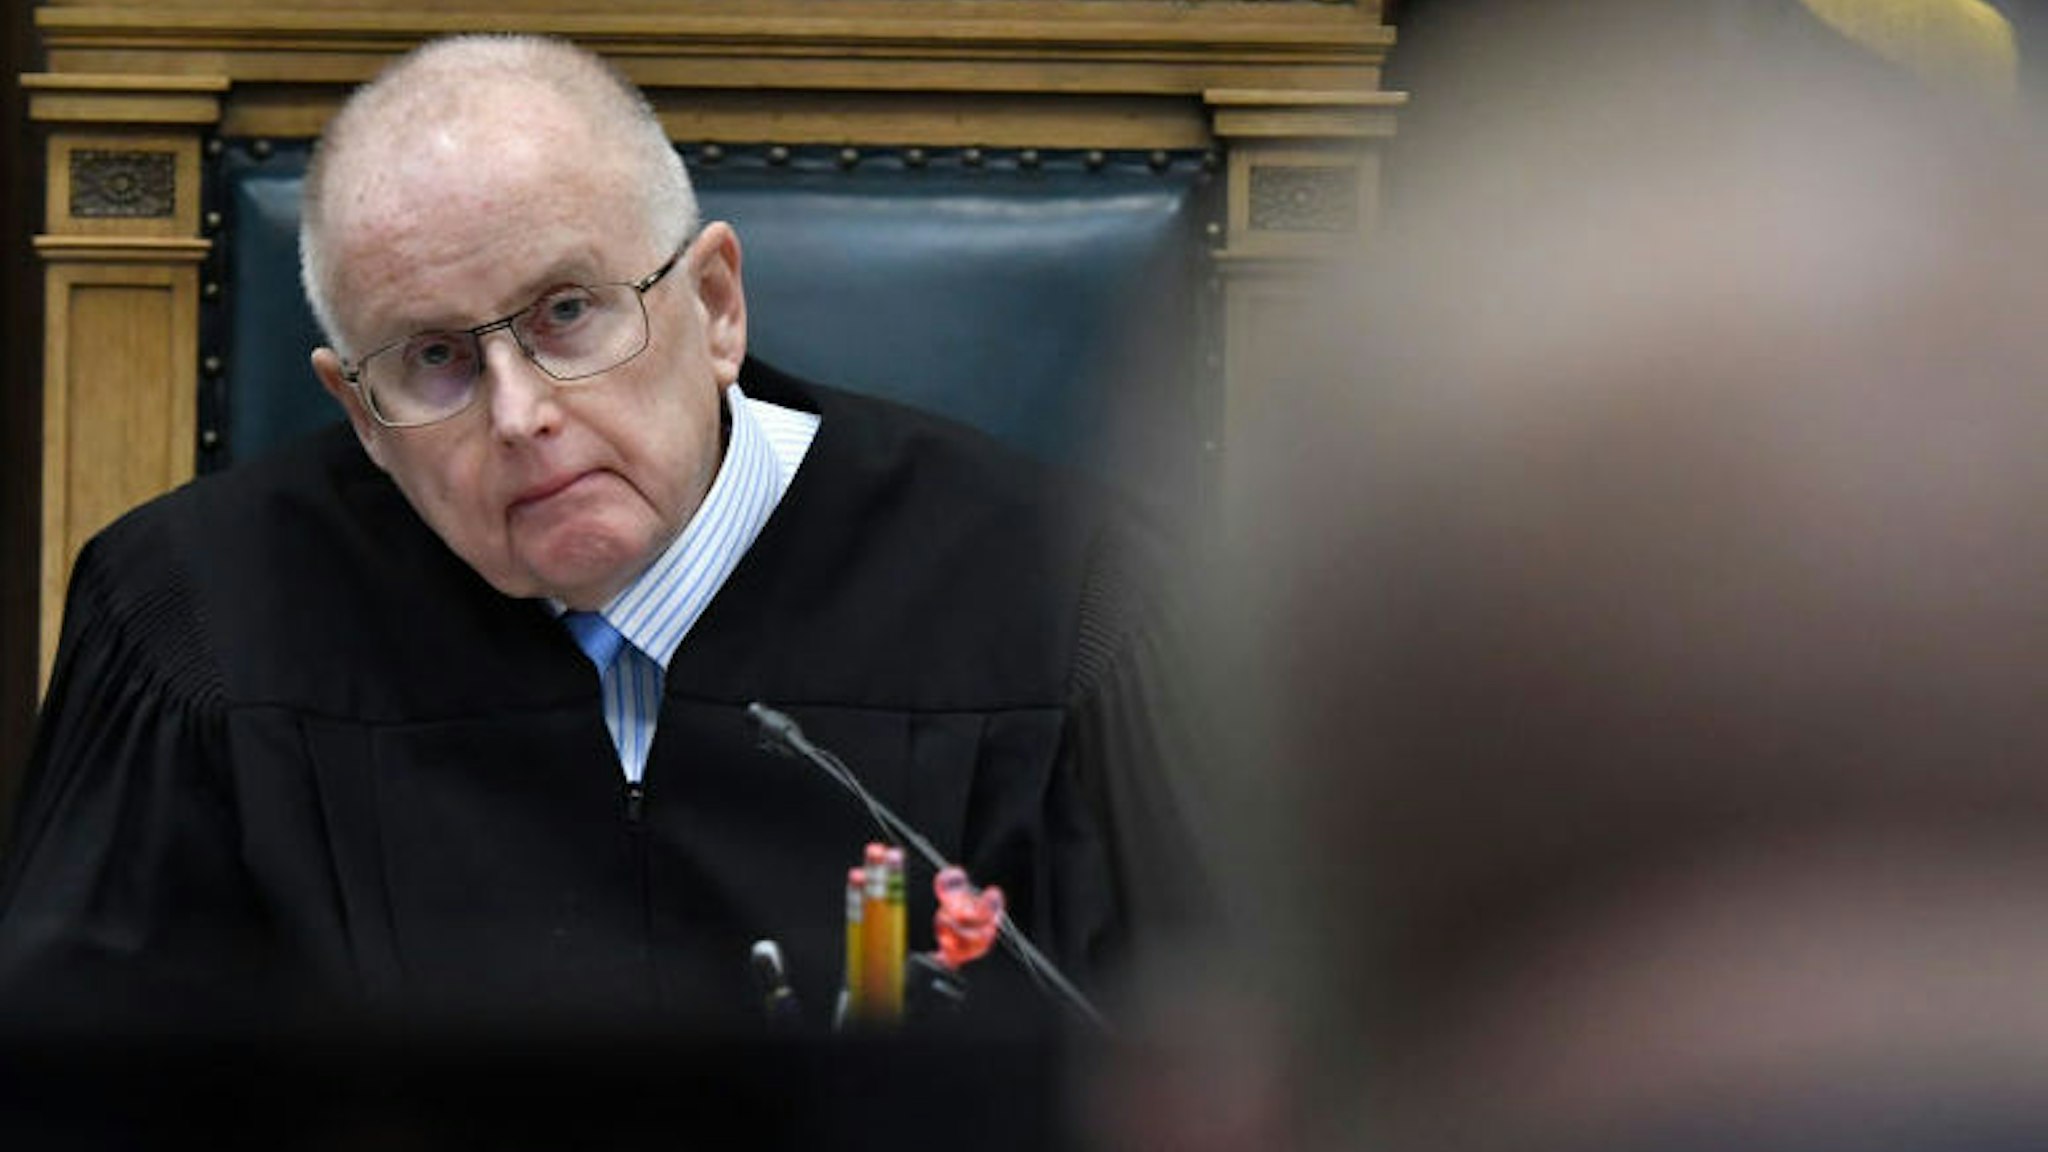 Judge Bruce Schroeder listens as Assistant District Attorney James Kraus speaks about an evidence video provided by the prosecution in Kyle Rittenhouse's trial at the Kenosha County Courthouse on November 17, 2021 in Kenosha, Wisconsin.